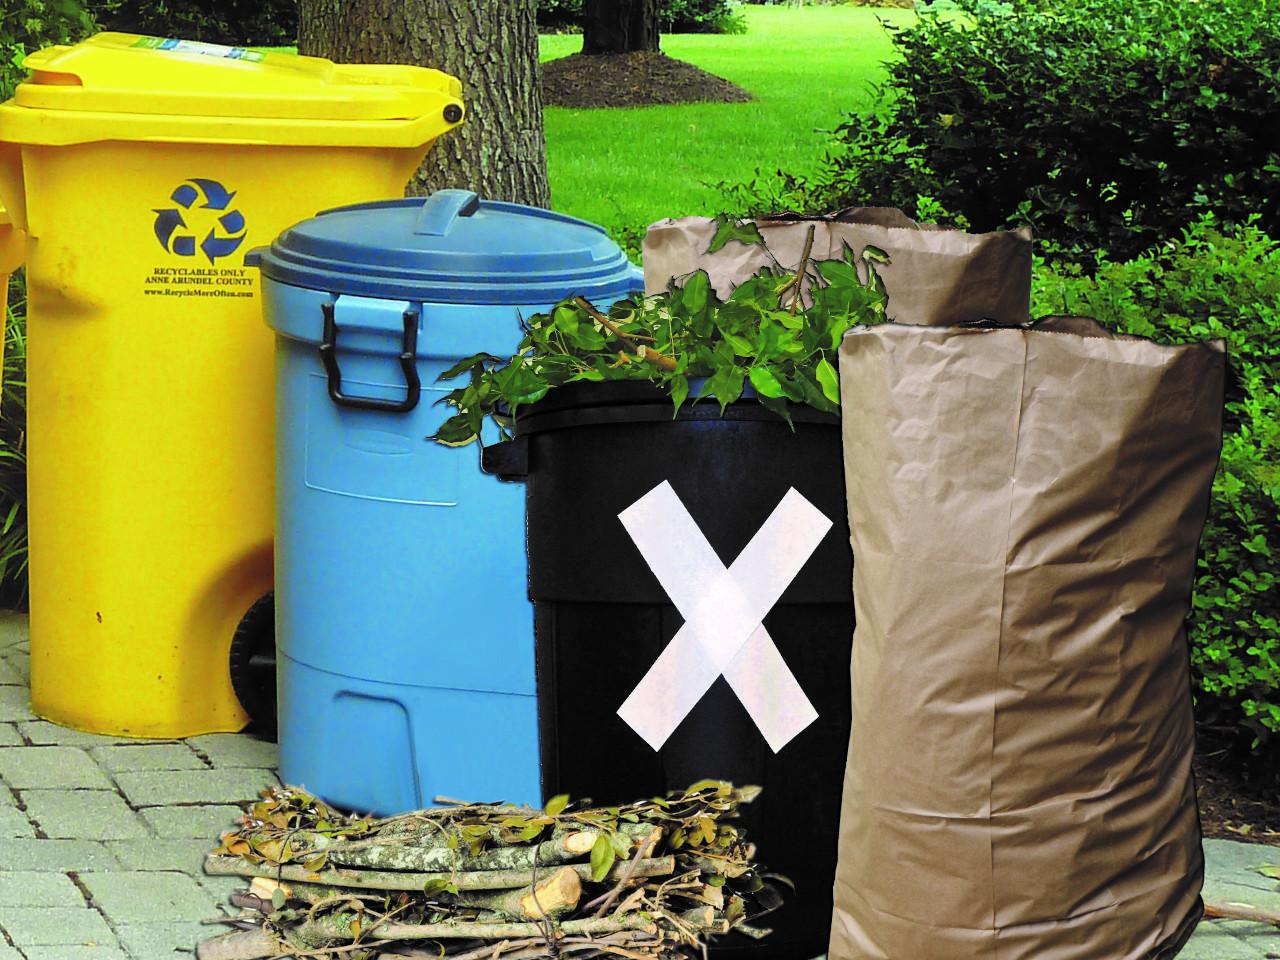 Trash, Recycling, and yard waste at curbside